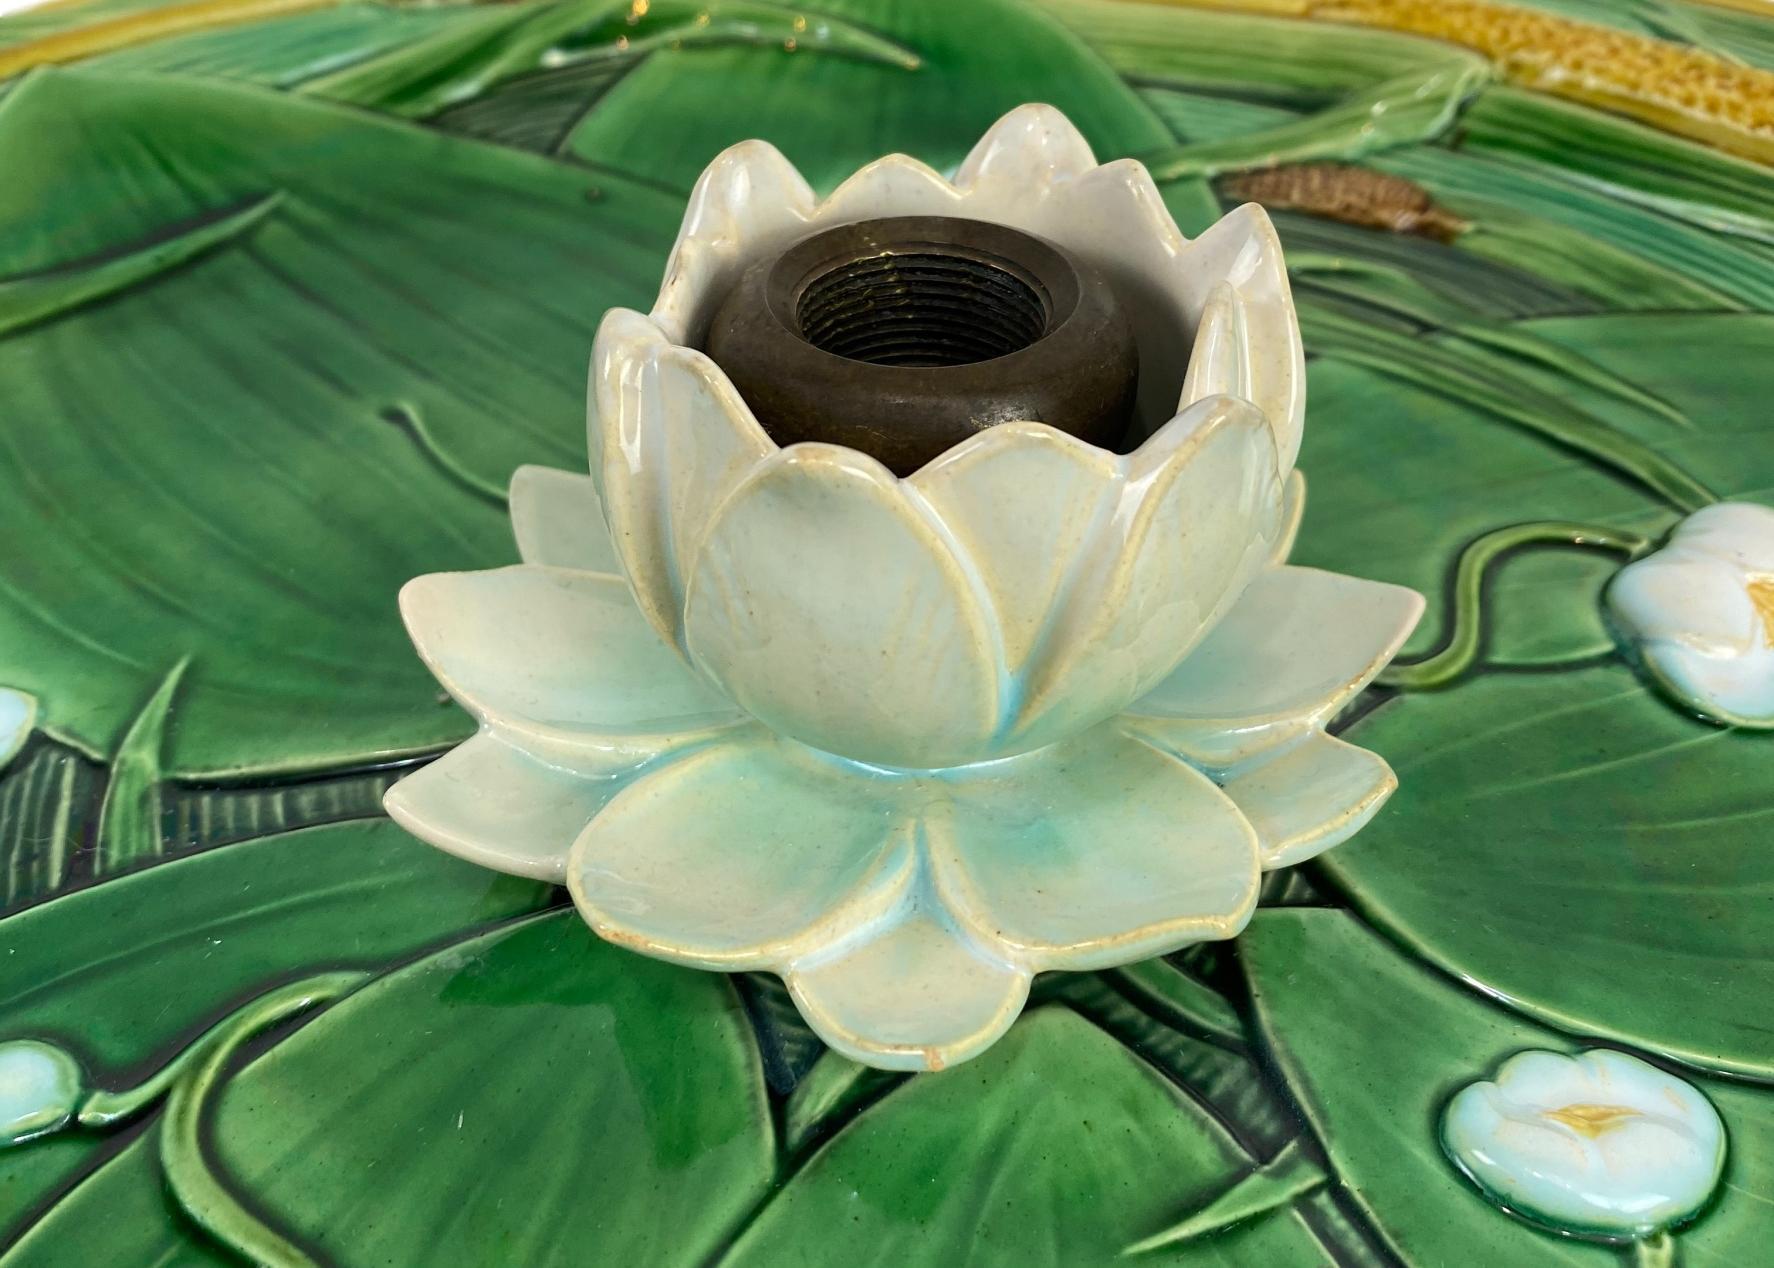 Victorian Minton Majolica Centerpiece Tray 15-in, Lotus Flower on Green Ground, Dated 1863 For Sale